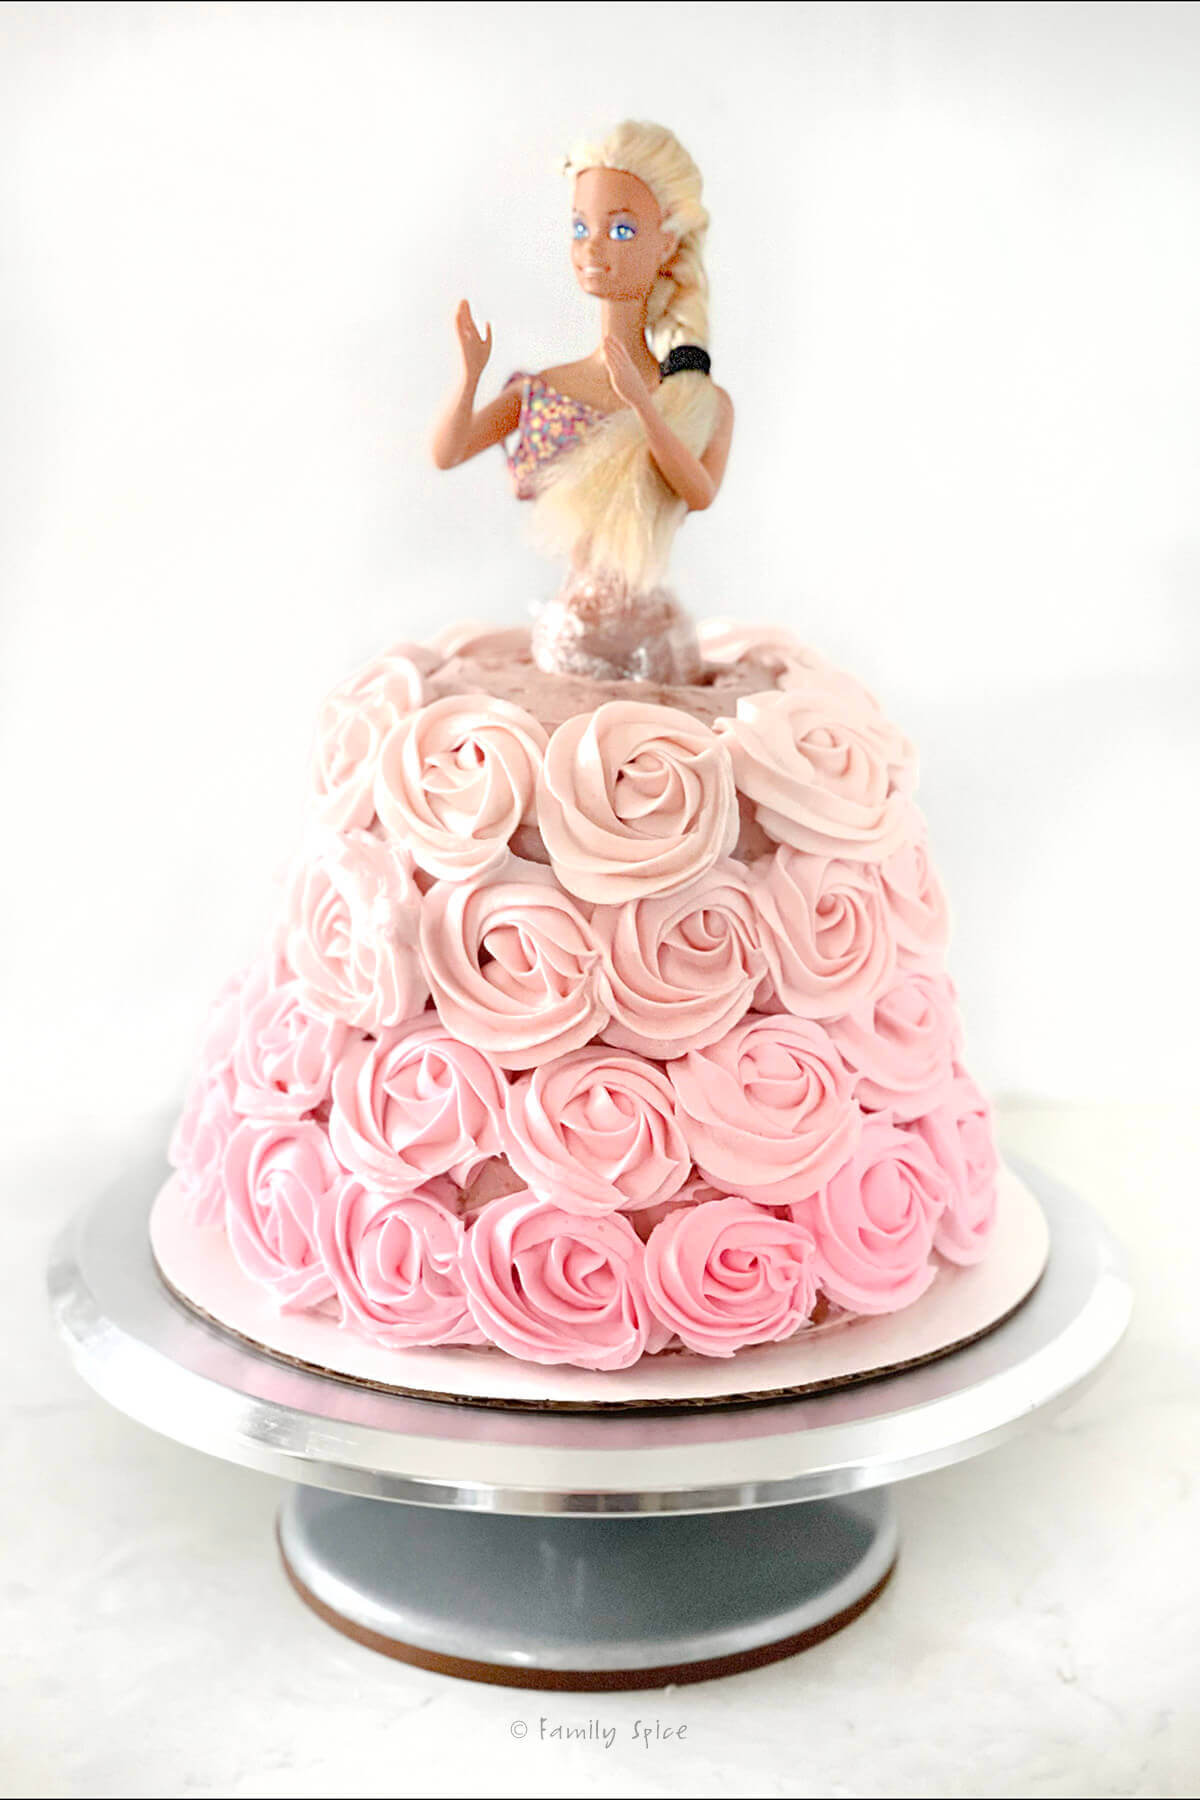 A classic barbie with legs wrapped in plastic wrap inserted into a strawberry cake with ombre pink rosettes